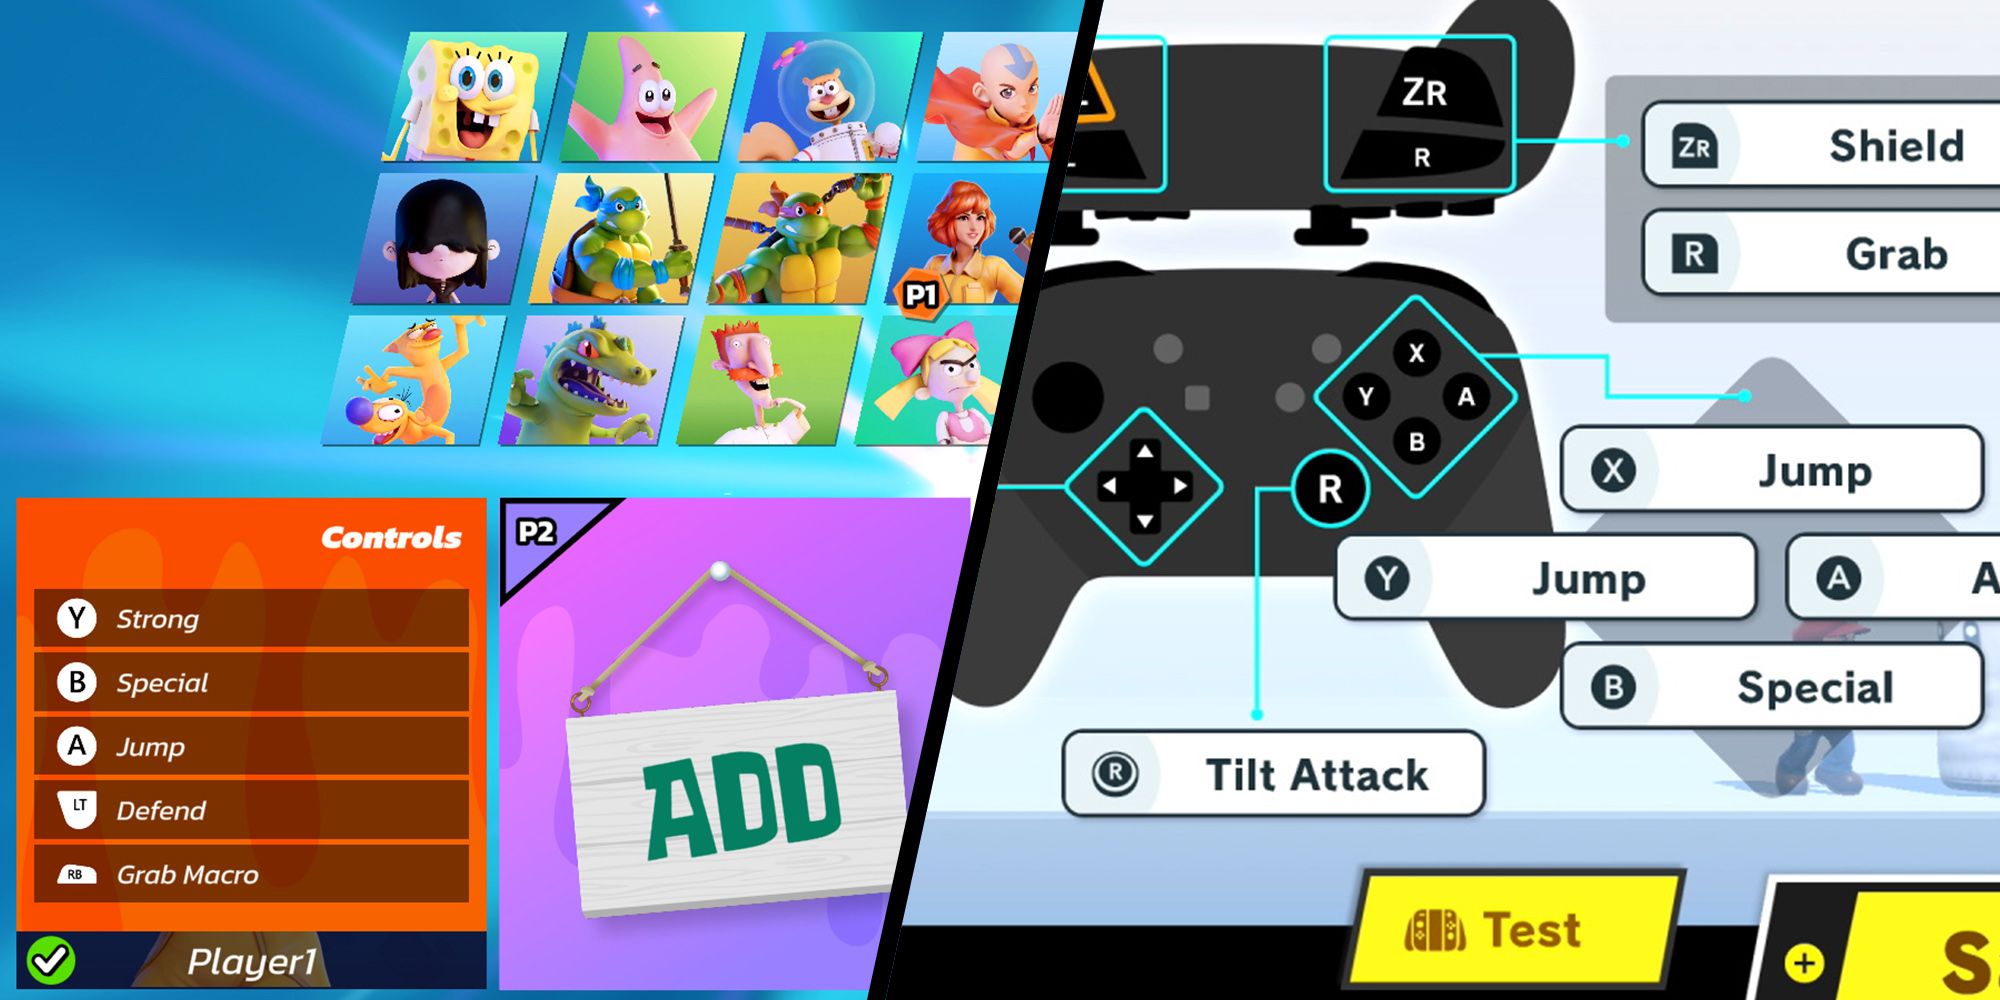 Comparing The Control Options For Both Nickelodeon All-Star Brawl And Super Smash Bros Ultimate